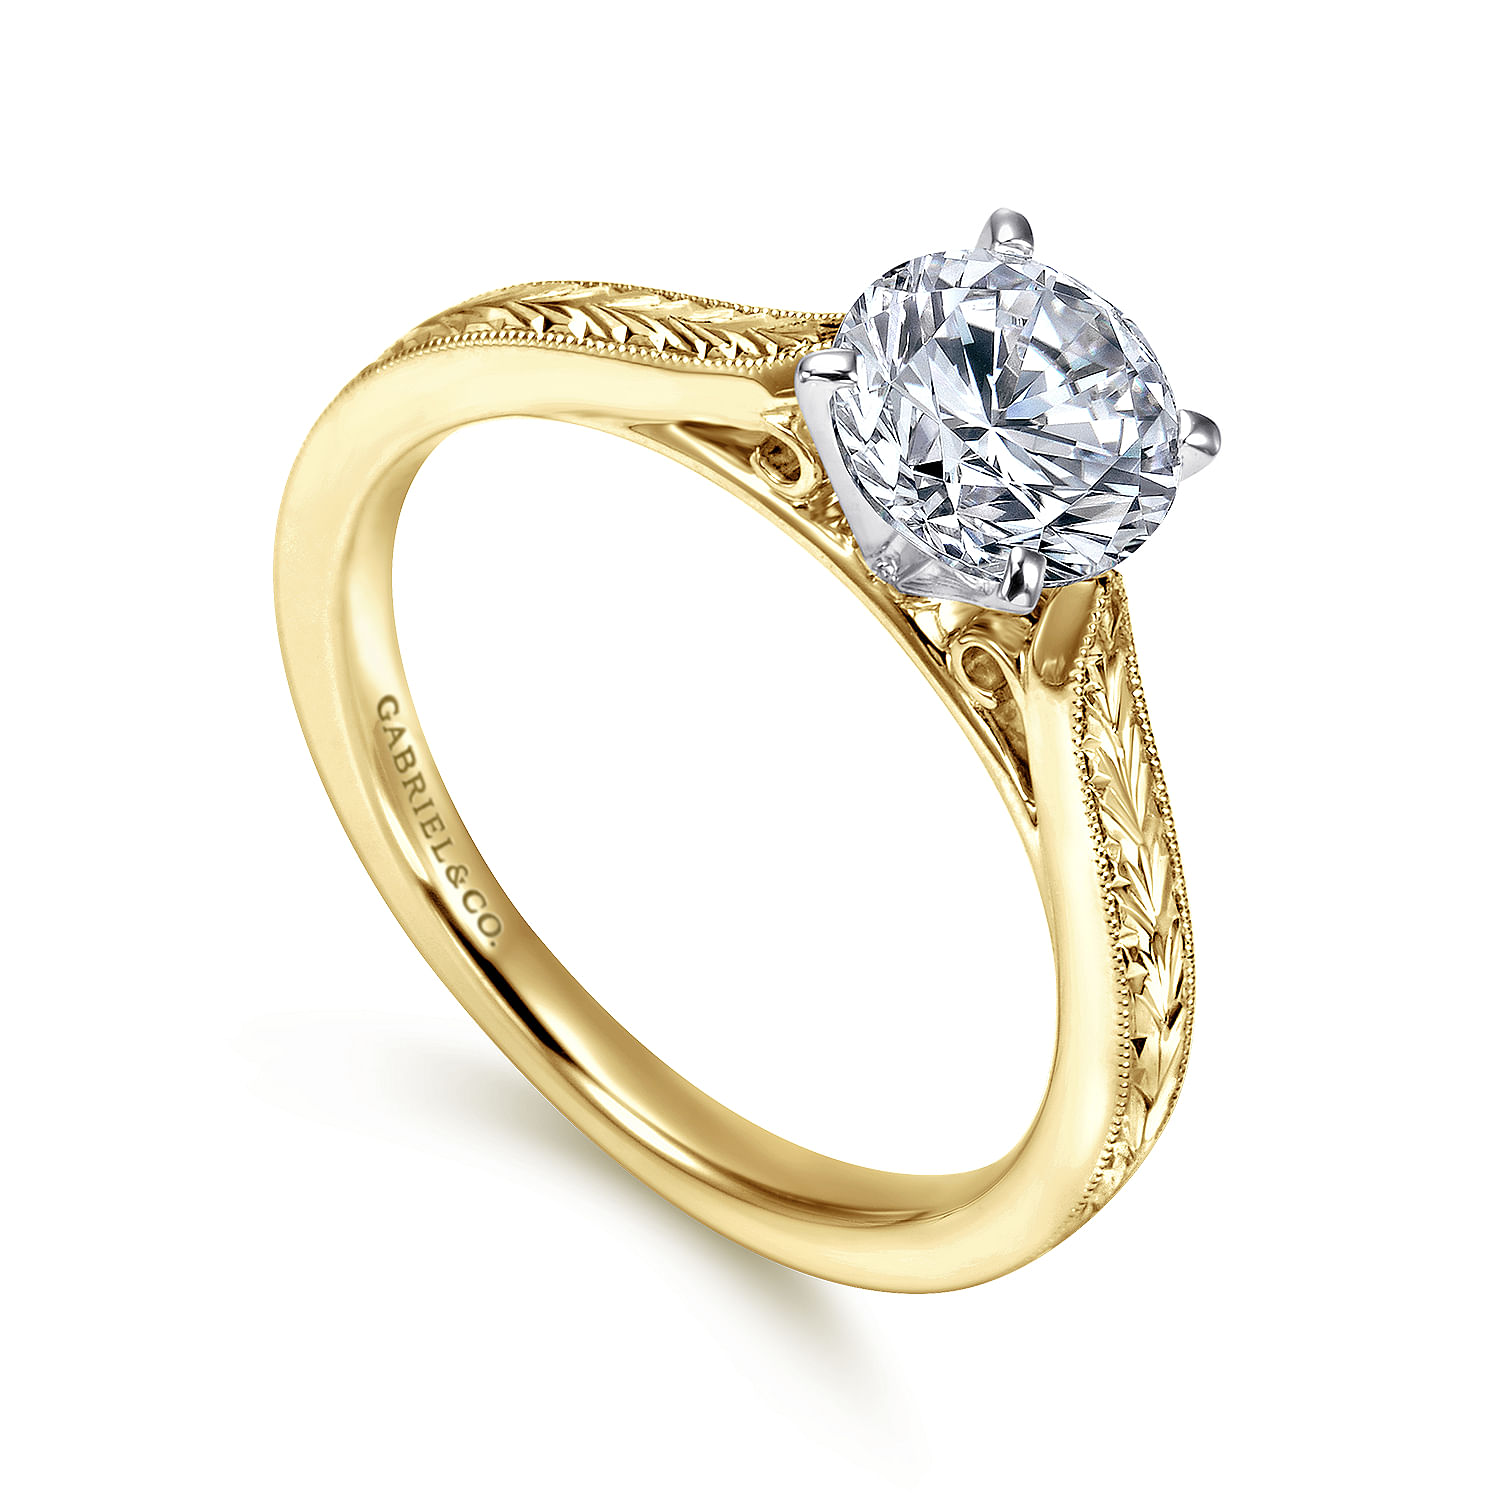 Vintage Inspired 14K White-Yellow Gold Round Solitaire Engagement Ring